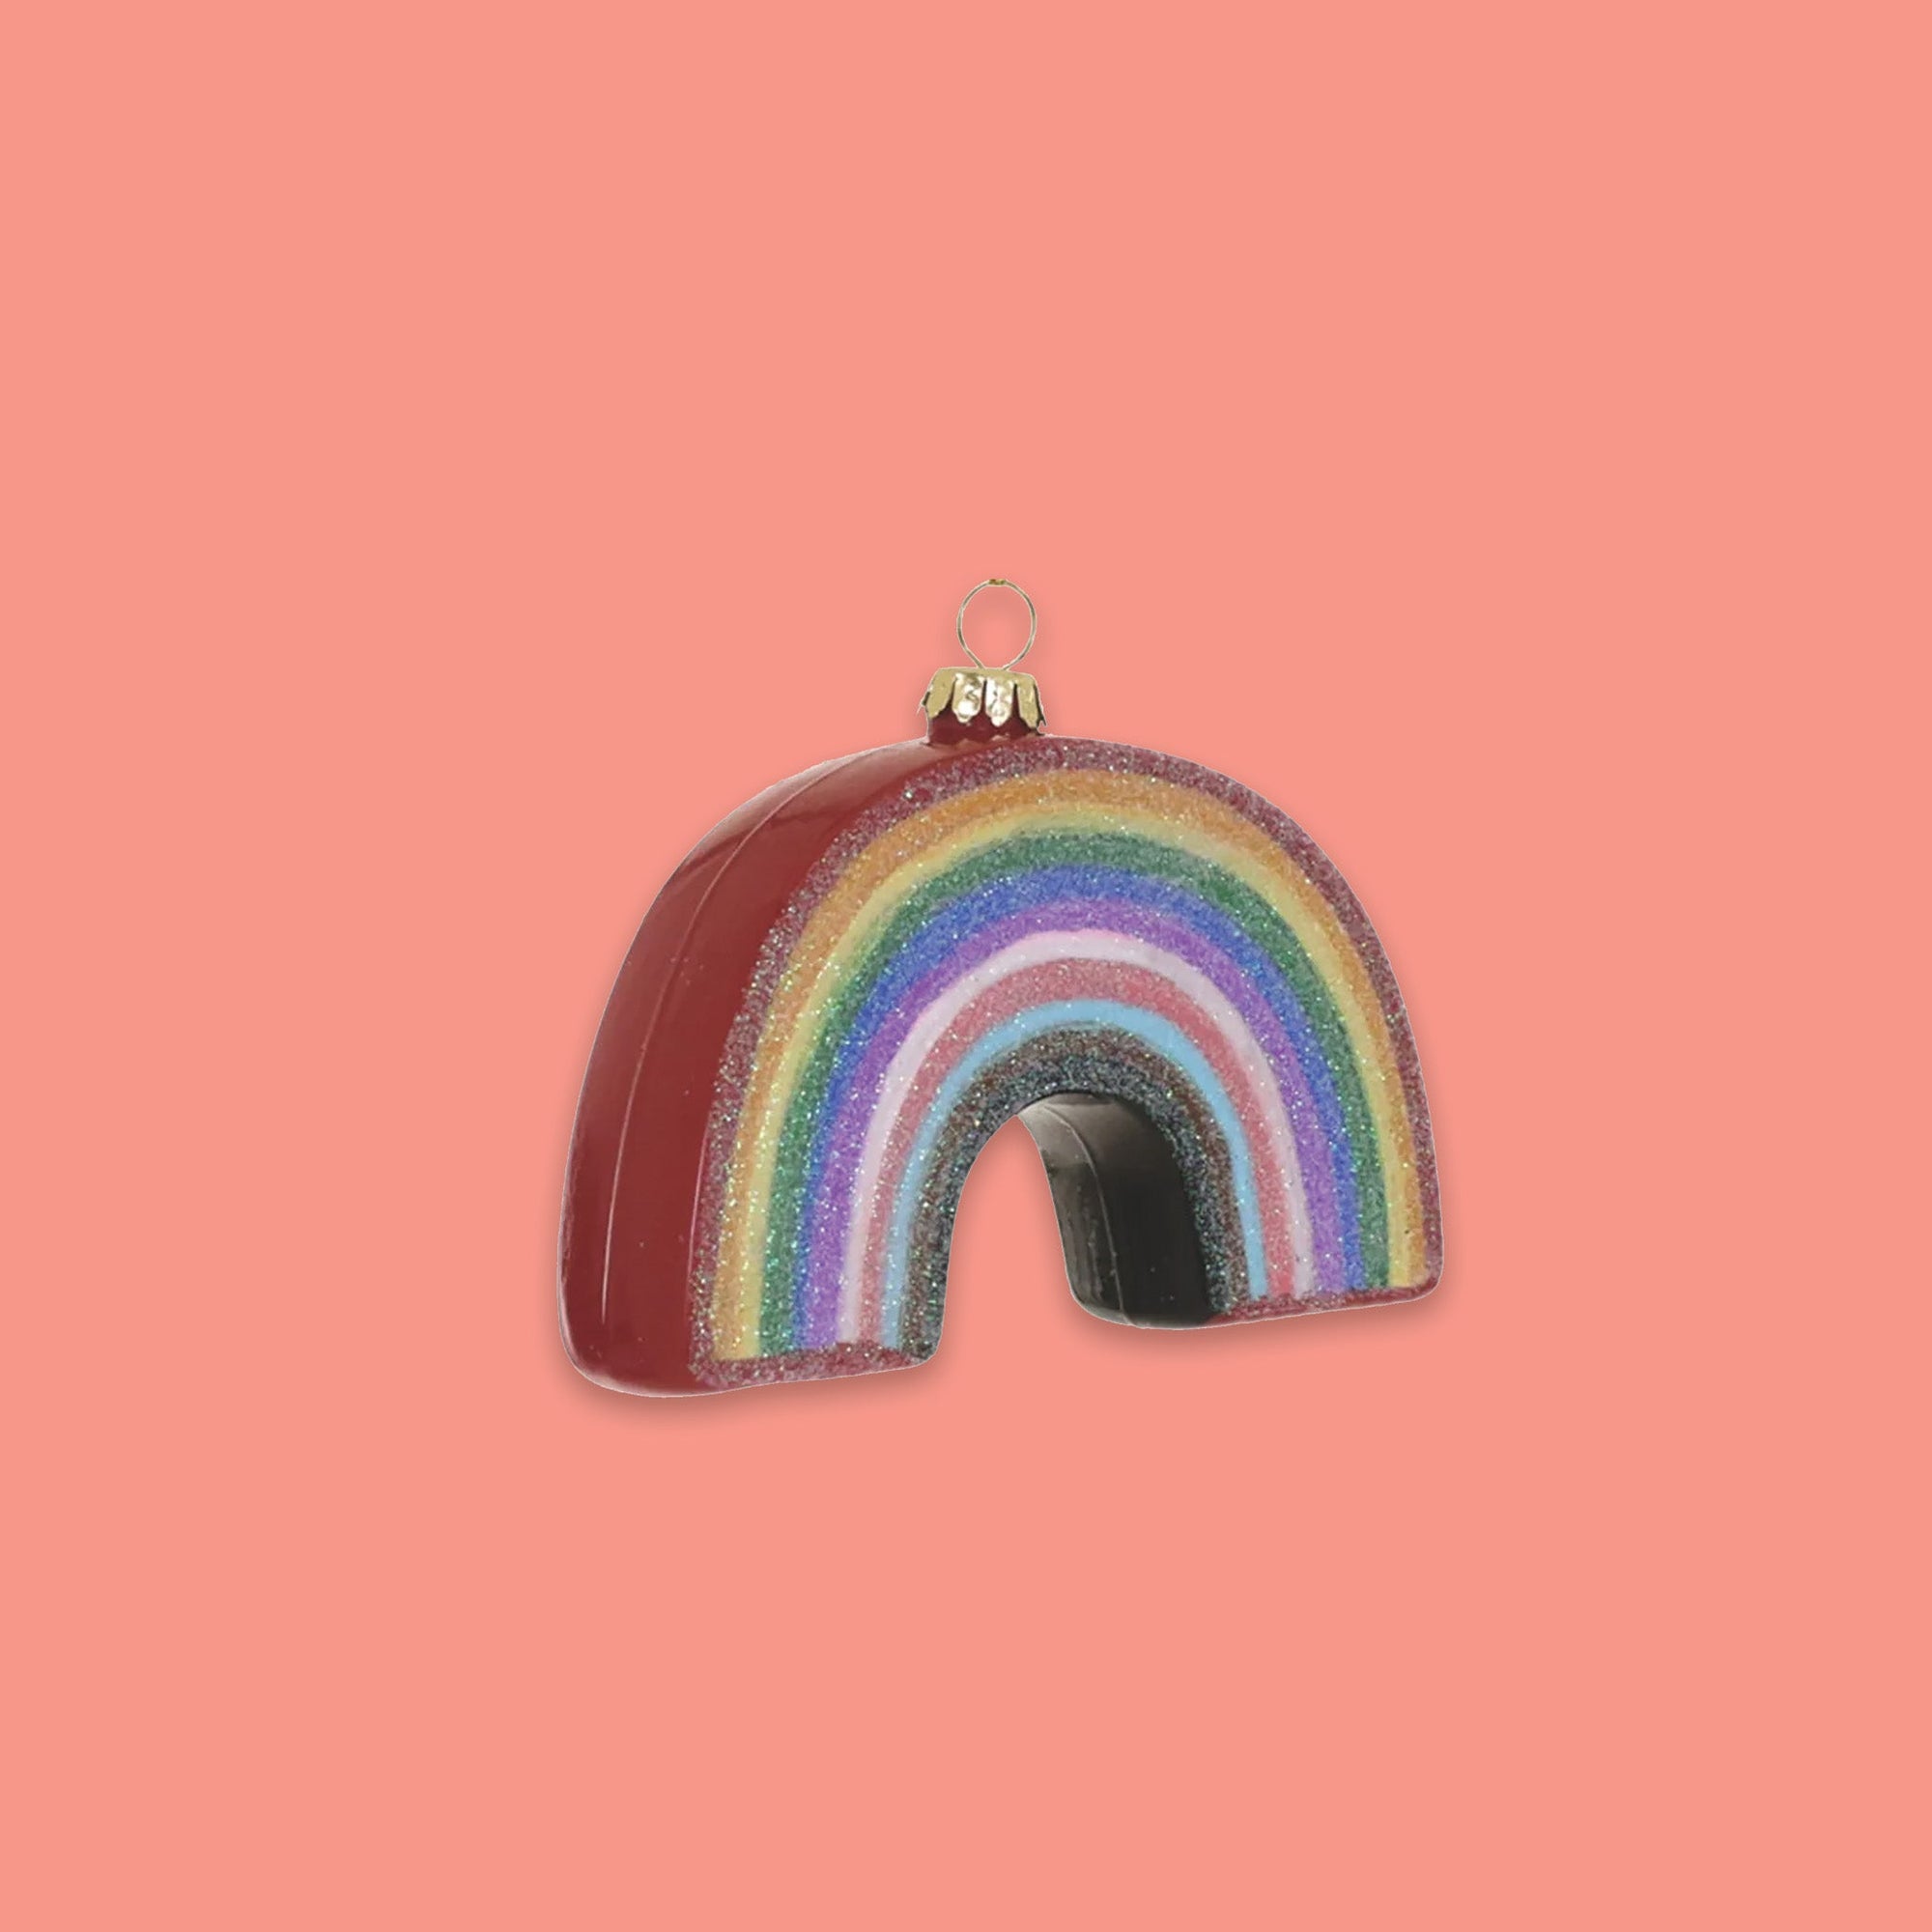 On a coral pink background sits an ornament. It is a glass rainbow and glitter colors of red, orange, yellow, green, blue, purple, pink, dark pink, and light blue.